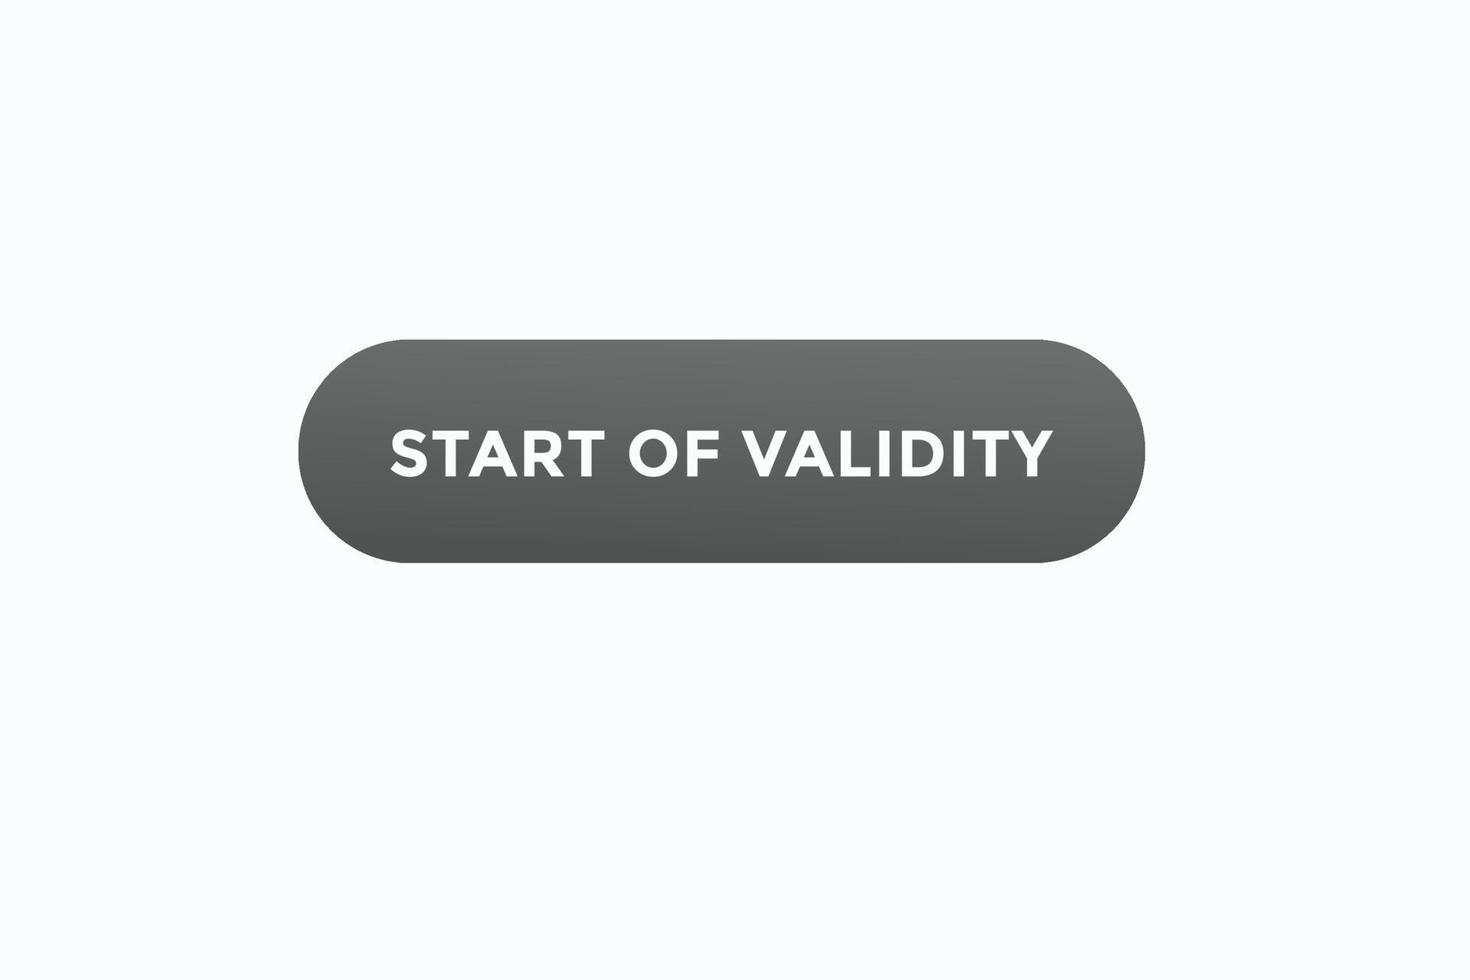 start of validity button vectors.sign label speech bubble start of validity vector